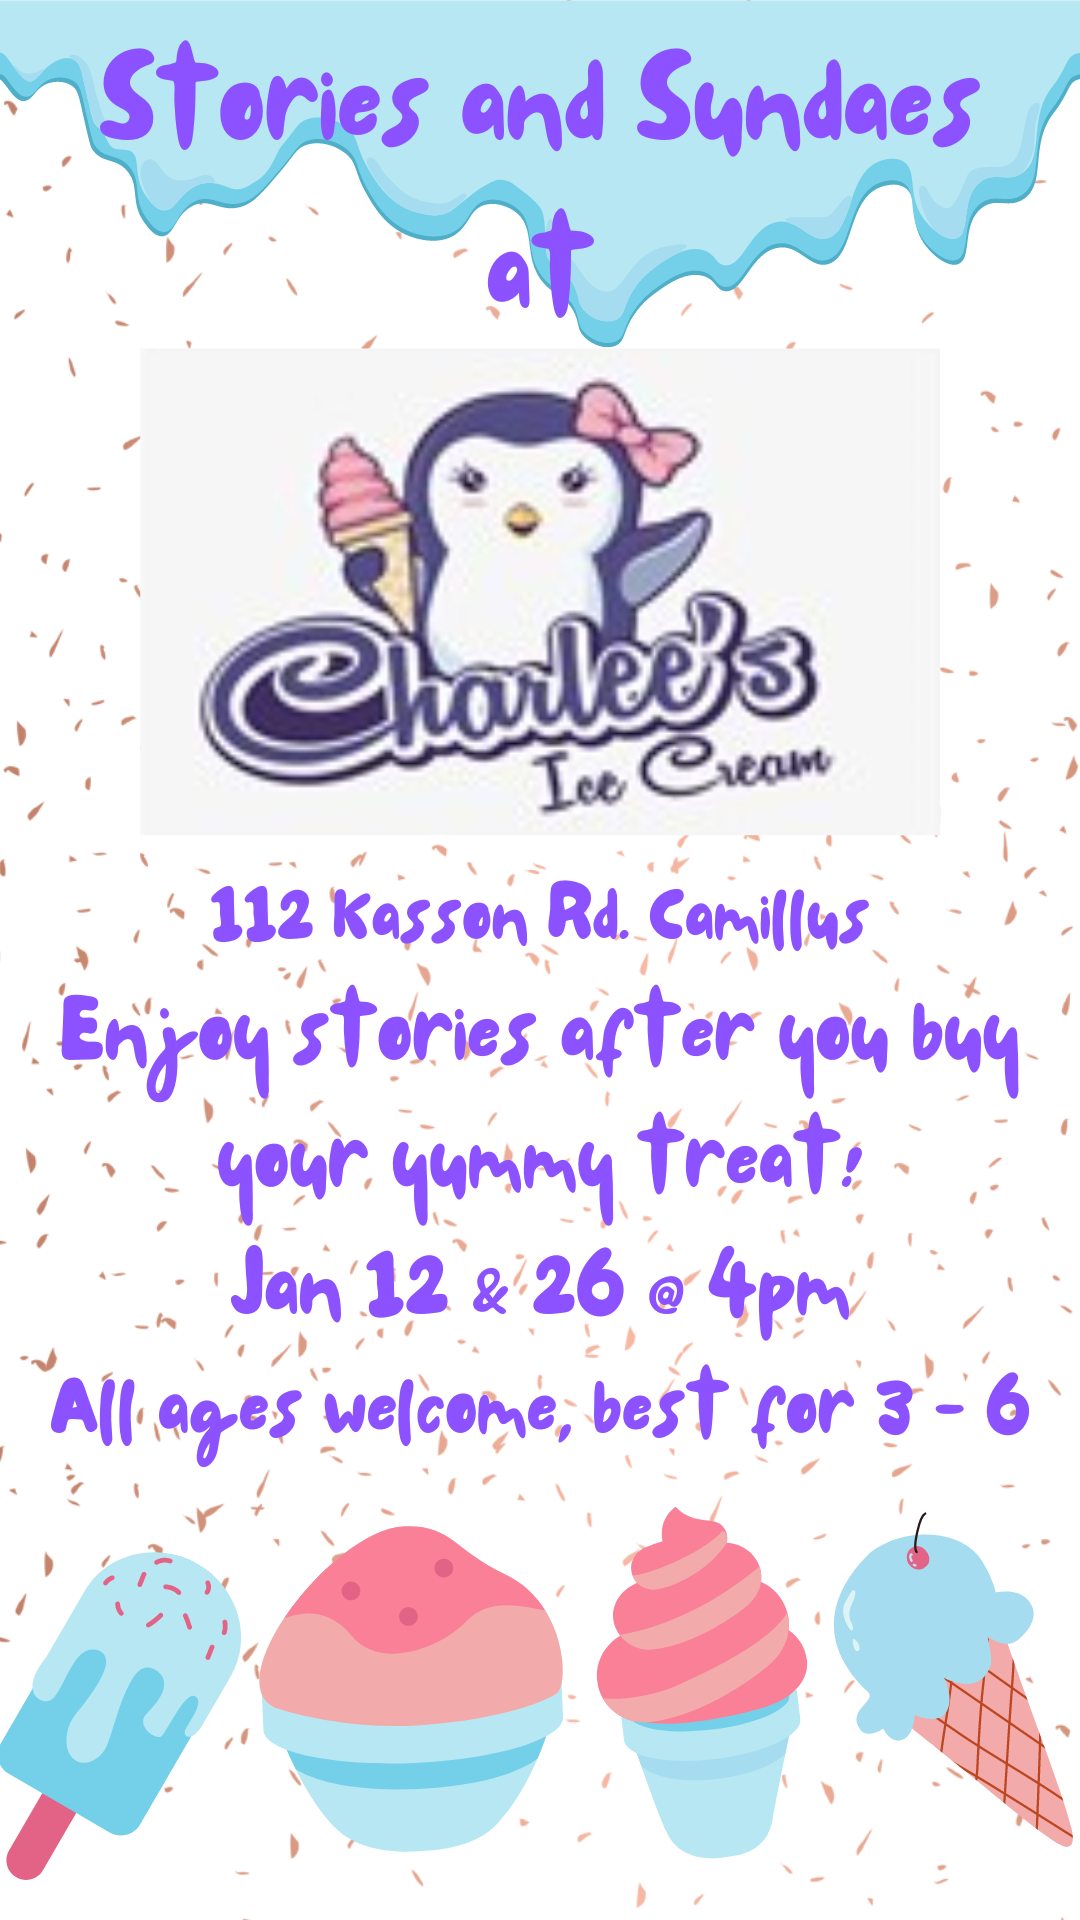 Stories and Sundaes
at
Charlee's Ice Cream
112 Kasson Rd. Camillus
Enjoy stories after you buy your yummy treat!
Jan 12 & 26 @ 4pm
All ages welcome, best for 3 - 6